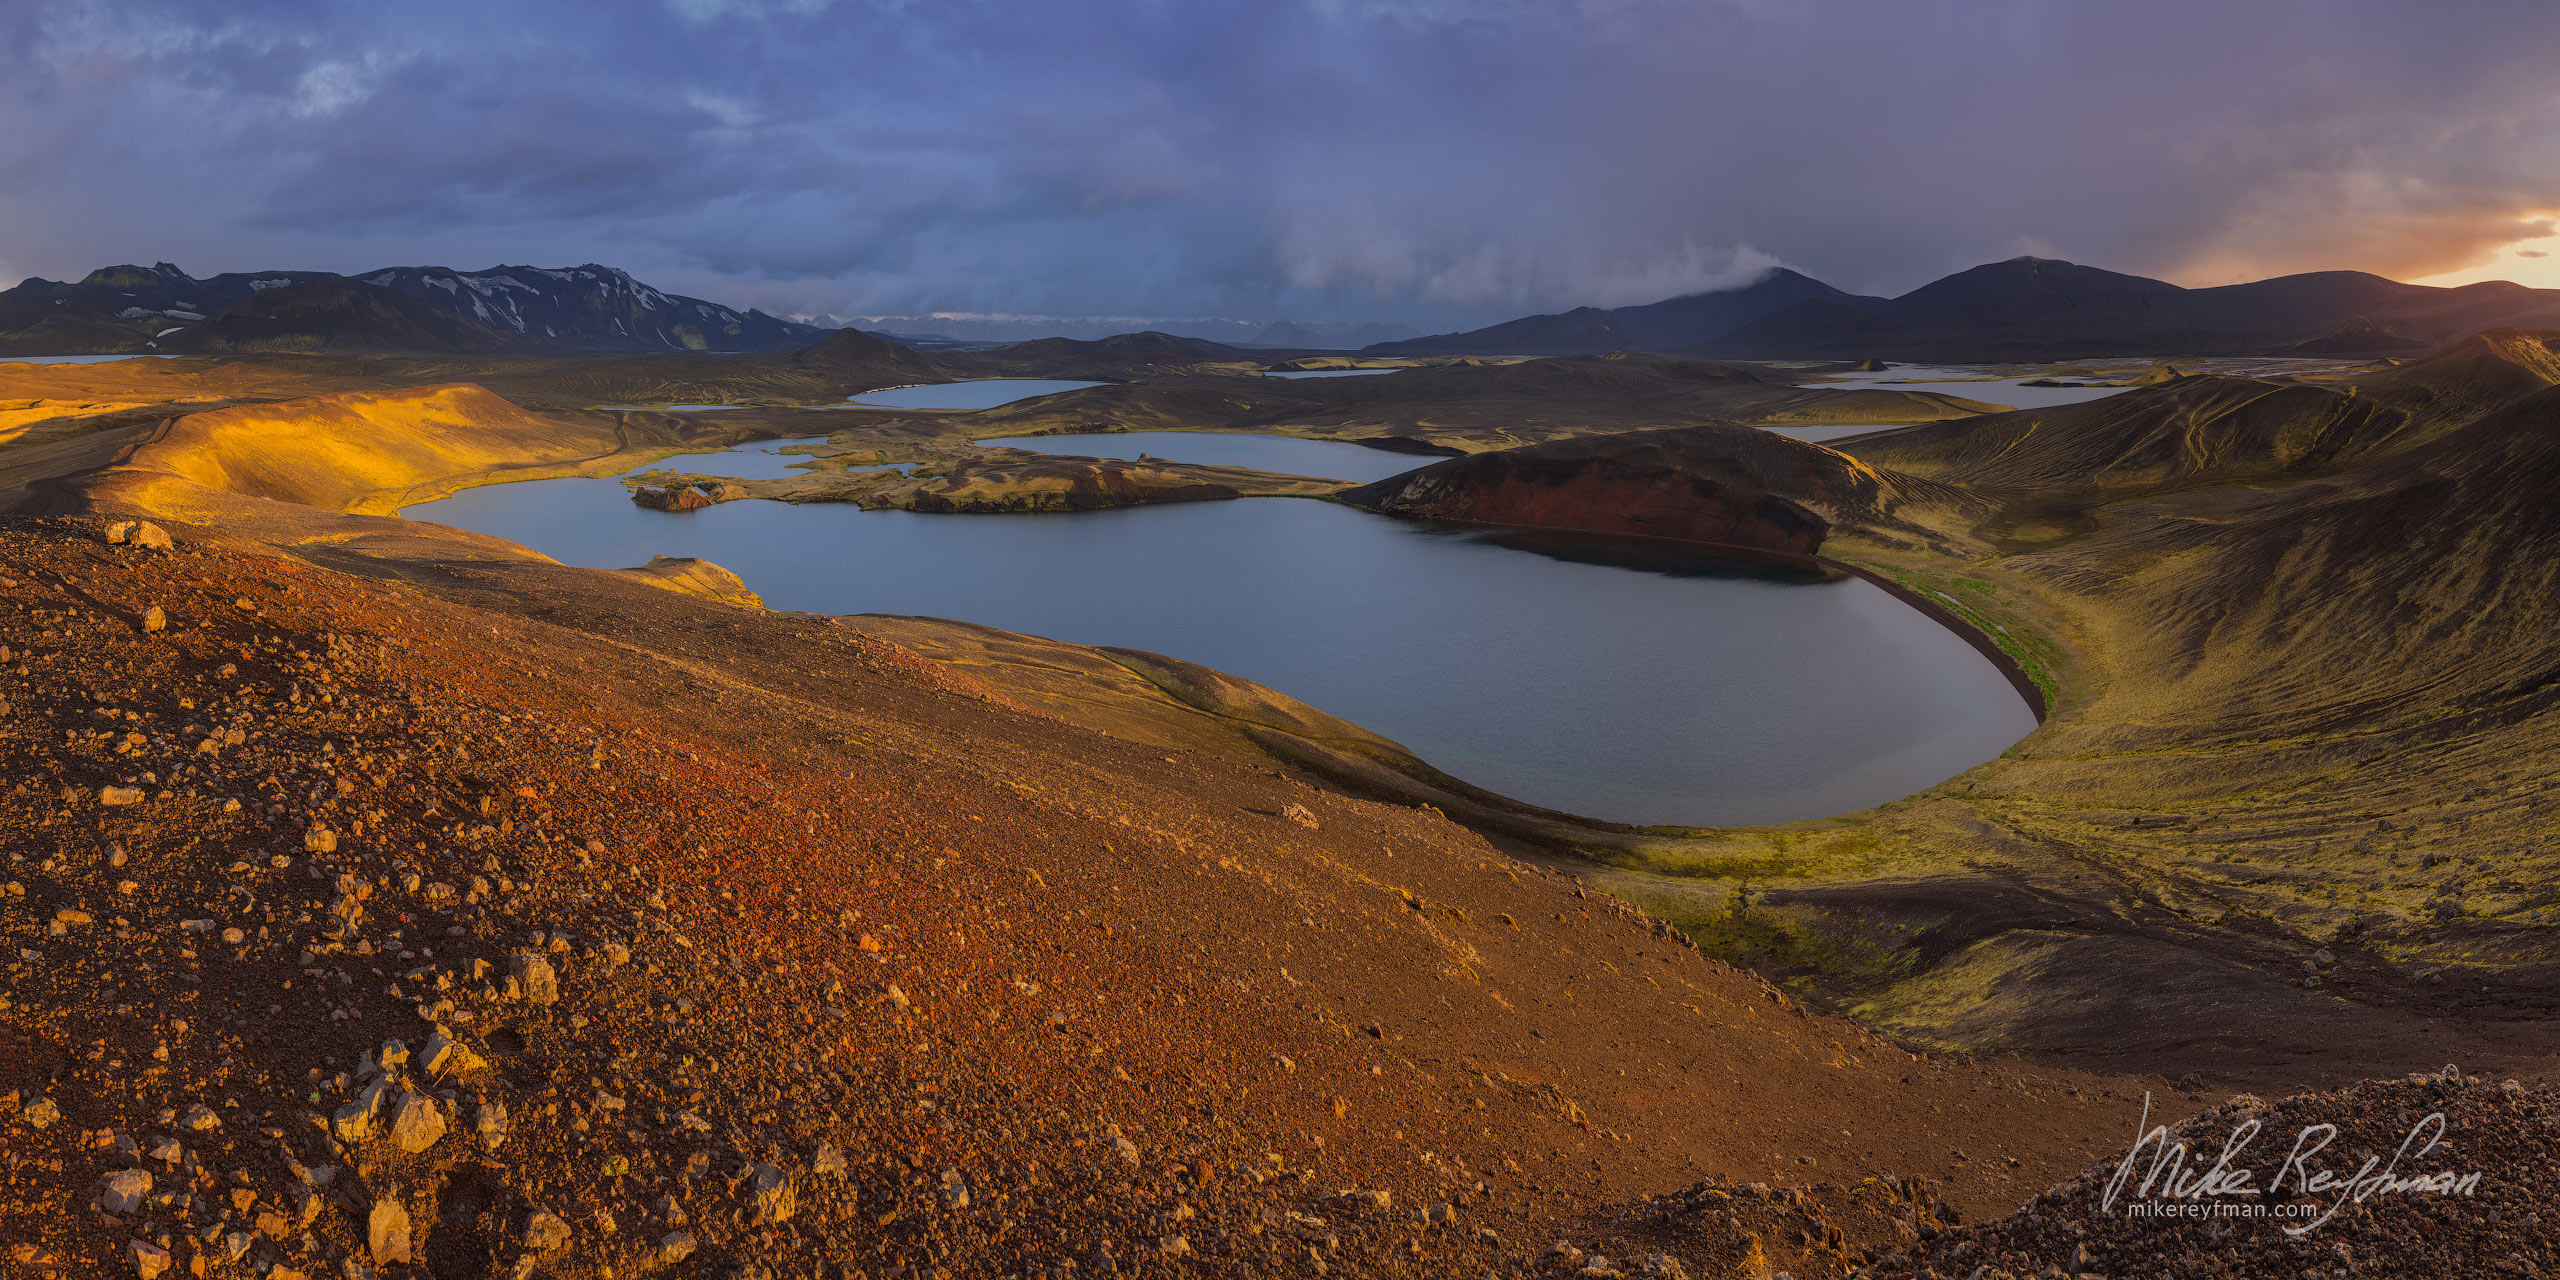 Crater lakes in the Veidivotn area. Central Highlands, Iceland. 071-IC-GP _D8B4378_Pano-1x2 - Rhyolite Mountains, Crater Lakes, Geothermal Areas, Lava Fields and Glacial Rivers. Iceland.  - Mike Reyfman Photography